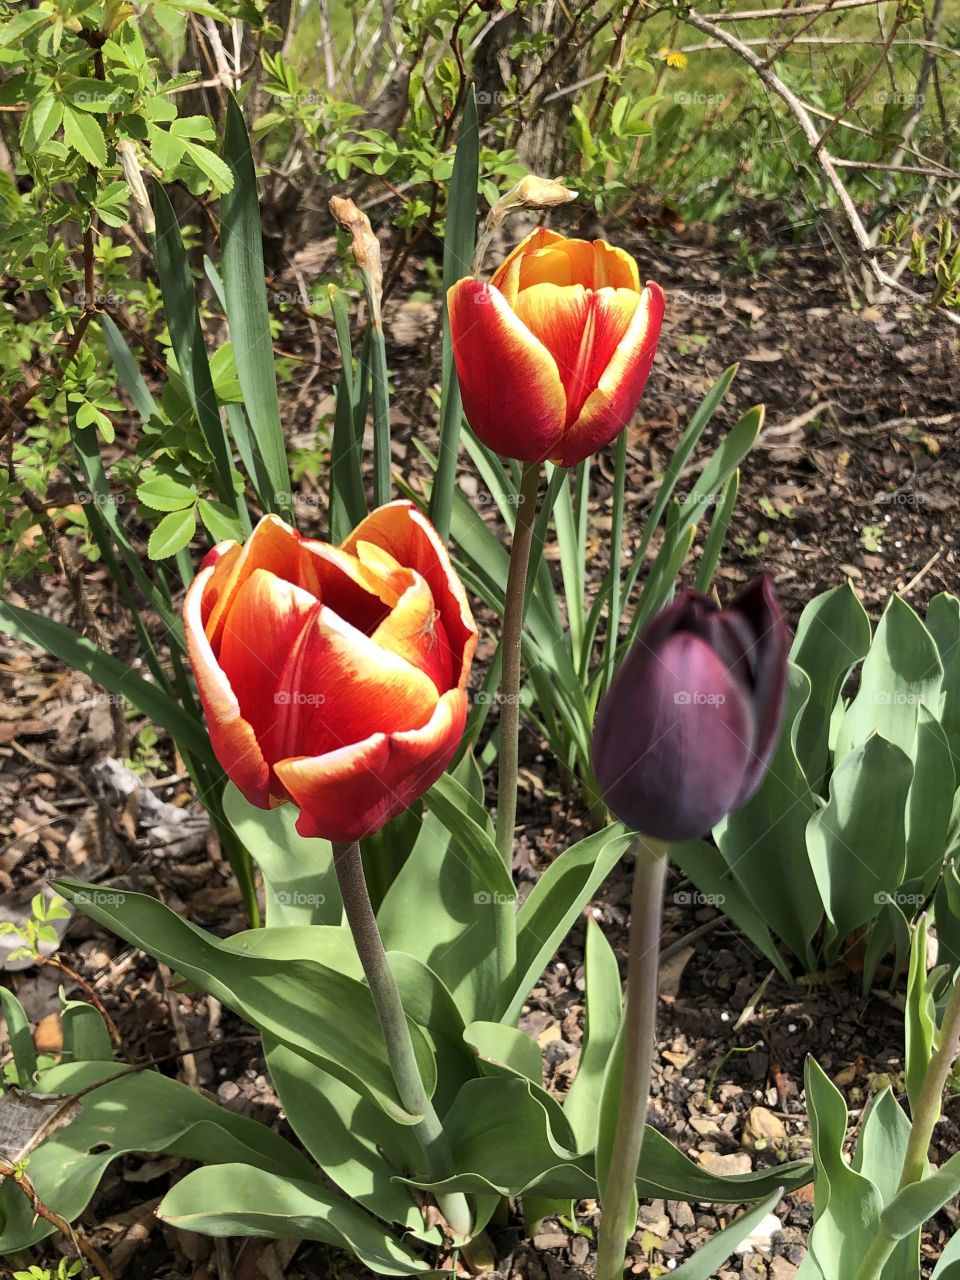 Tulips in multiple colors